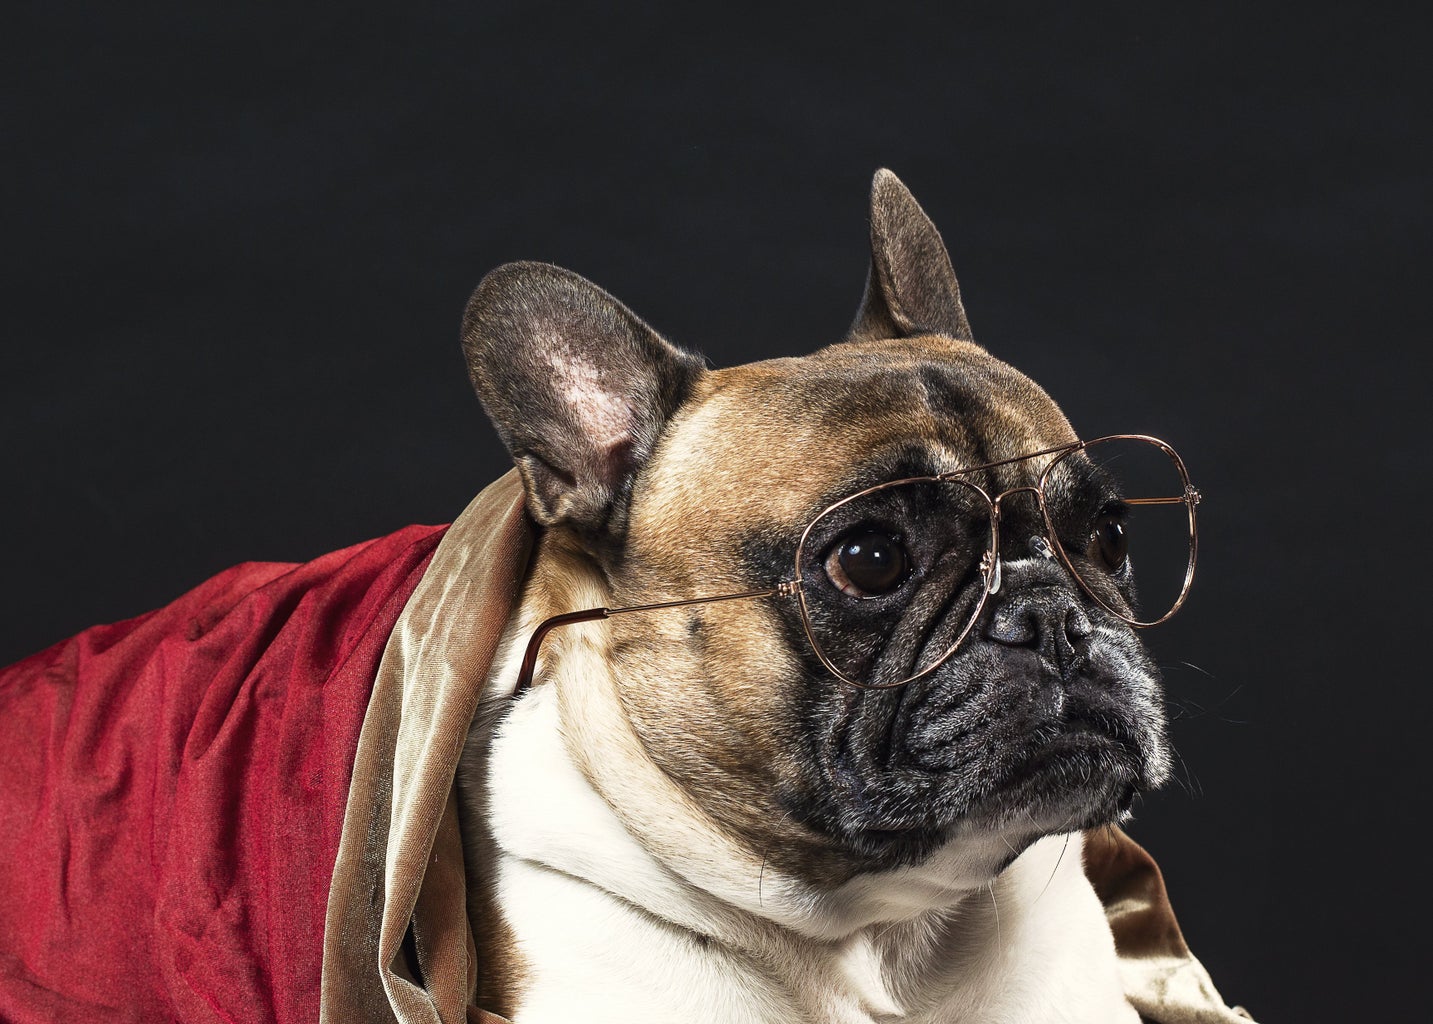 A dog wearing a costume with glasses